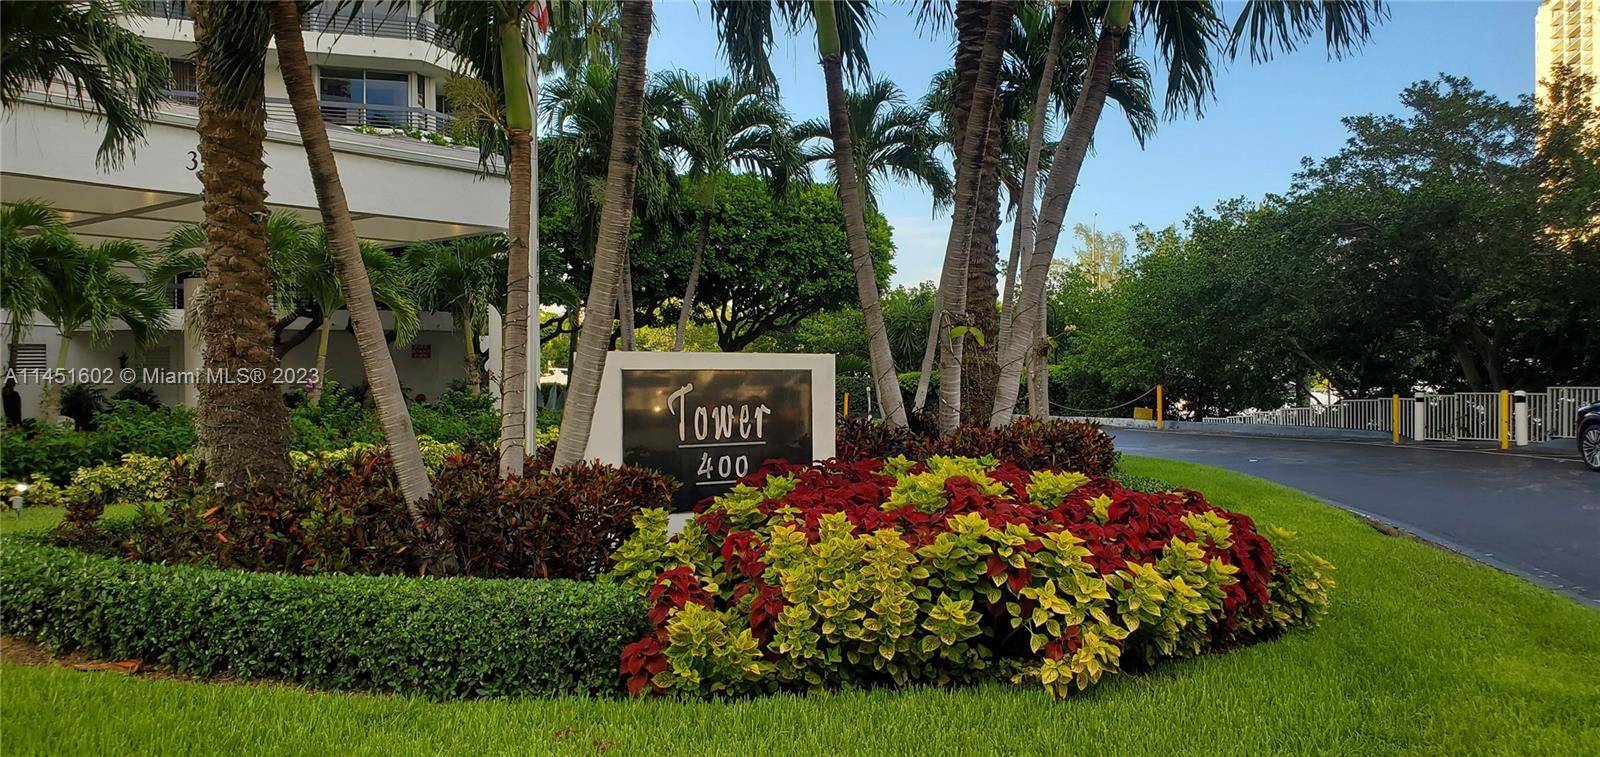 INVESTORS SPECIAL COMBINE PERSONAL USE WITH RENTAL INCOME Located in an impeccable gated neighborhood with a tropical resort feel in AVENTURA.